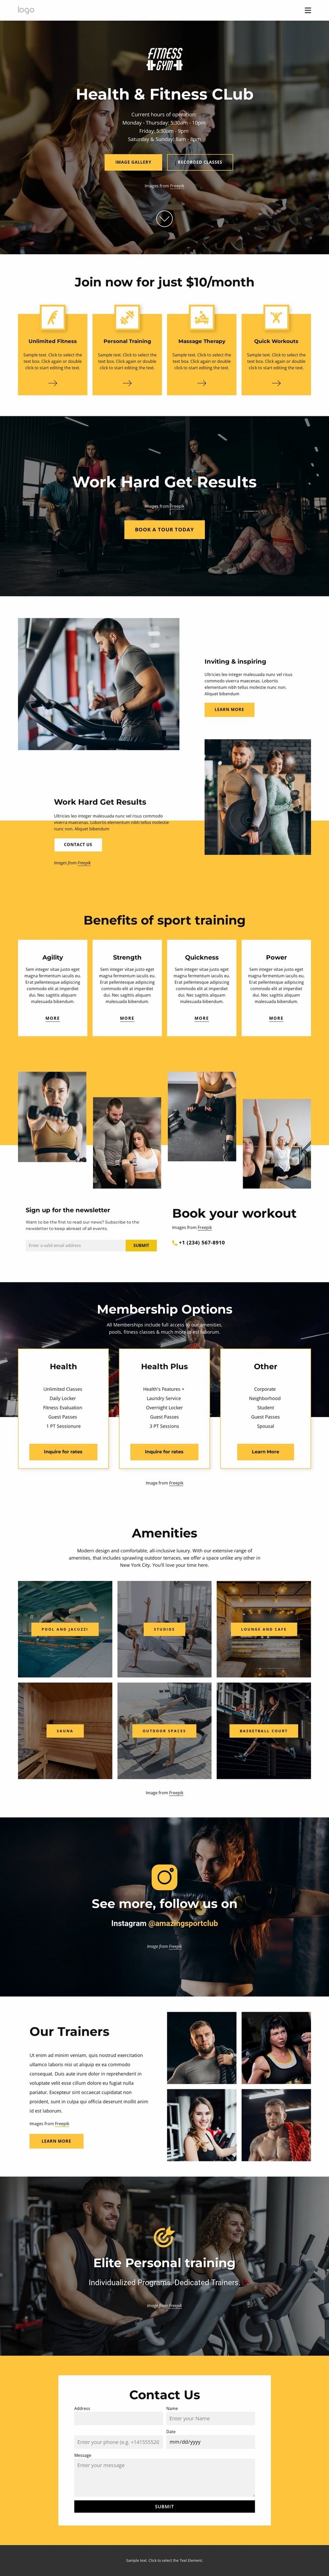 Health and fitness club Web Page Design